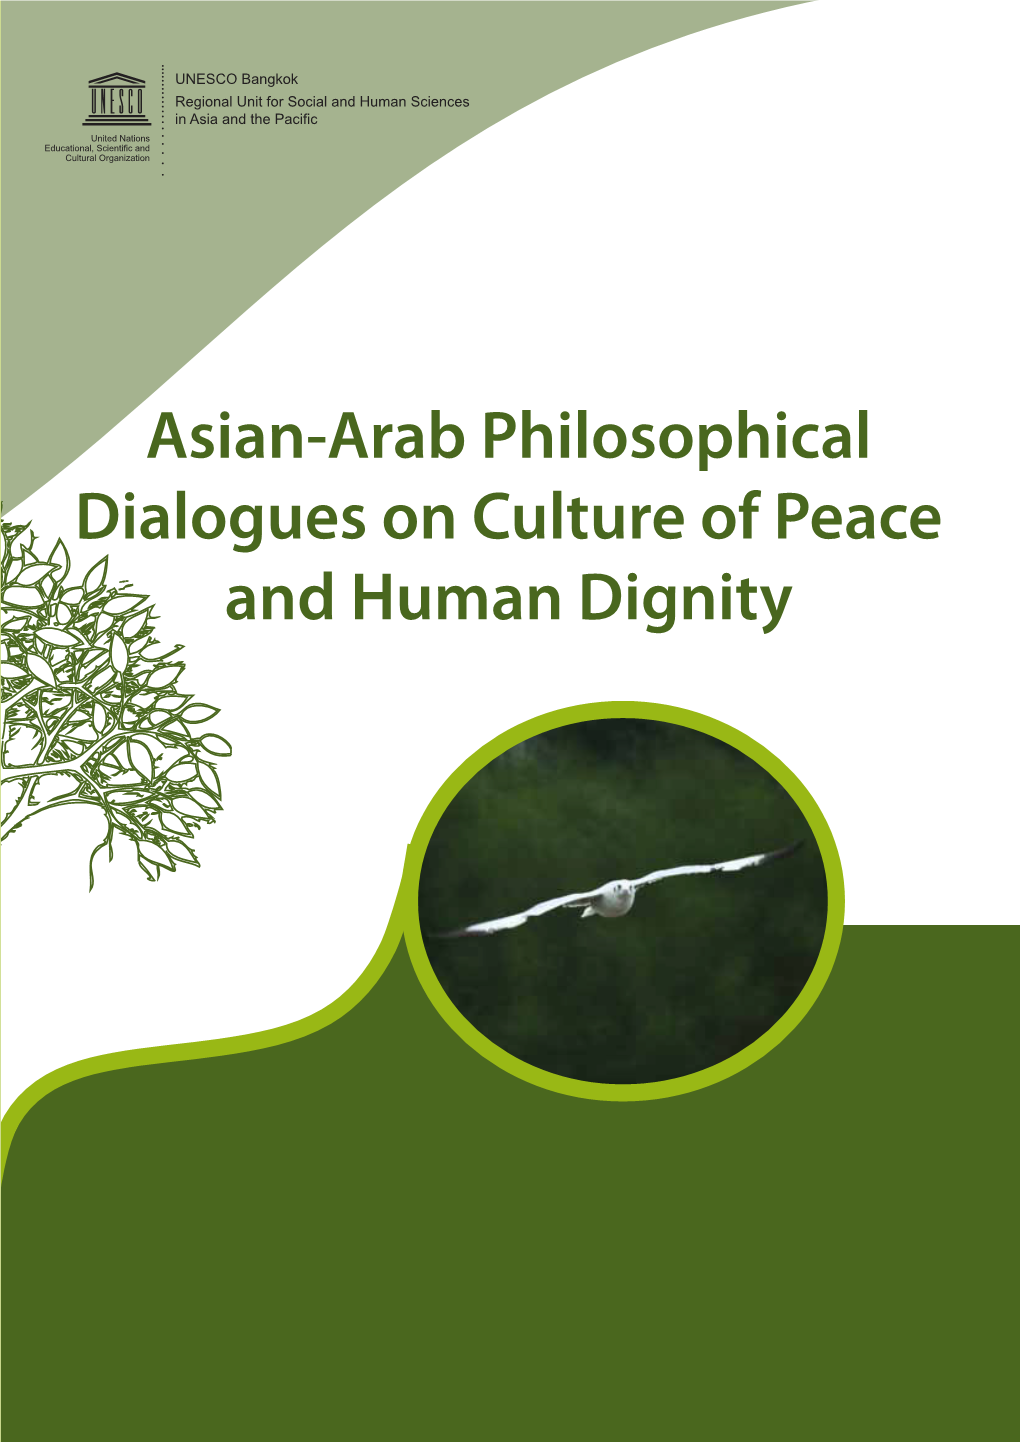 Asian-Arab Philosophical Dialogues on Culture of Peace and Human Dignity